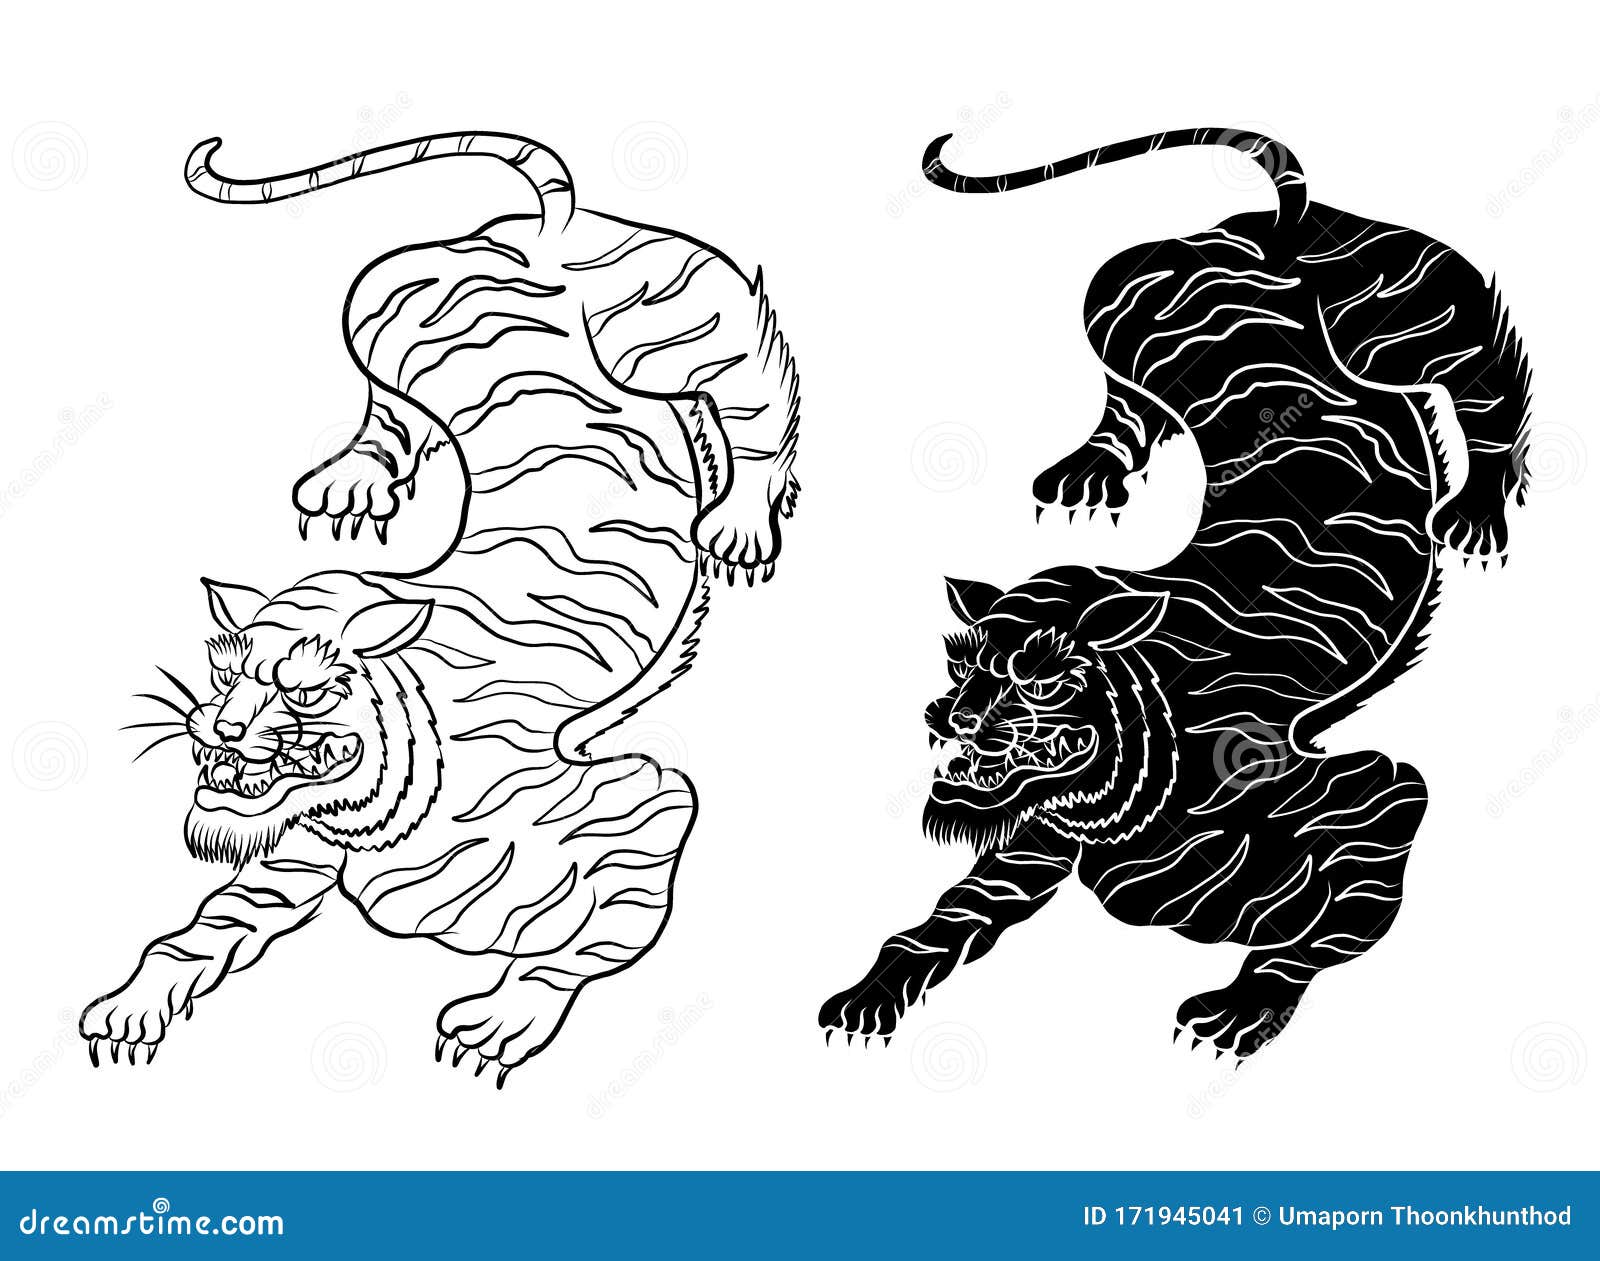 Traditional Tiger Vector Illustration for Sticker or Tattoo Design on ...